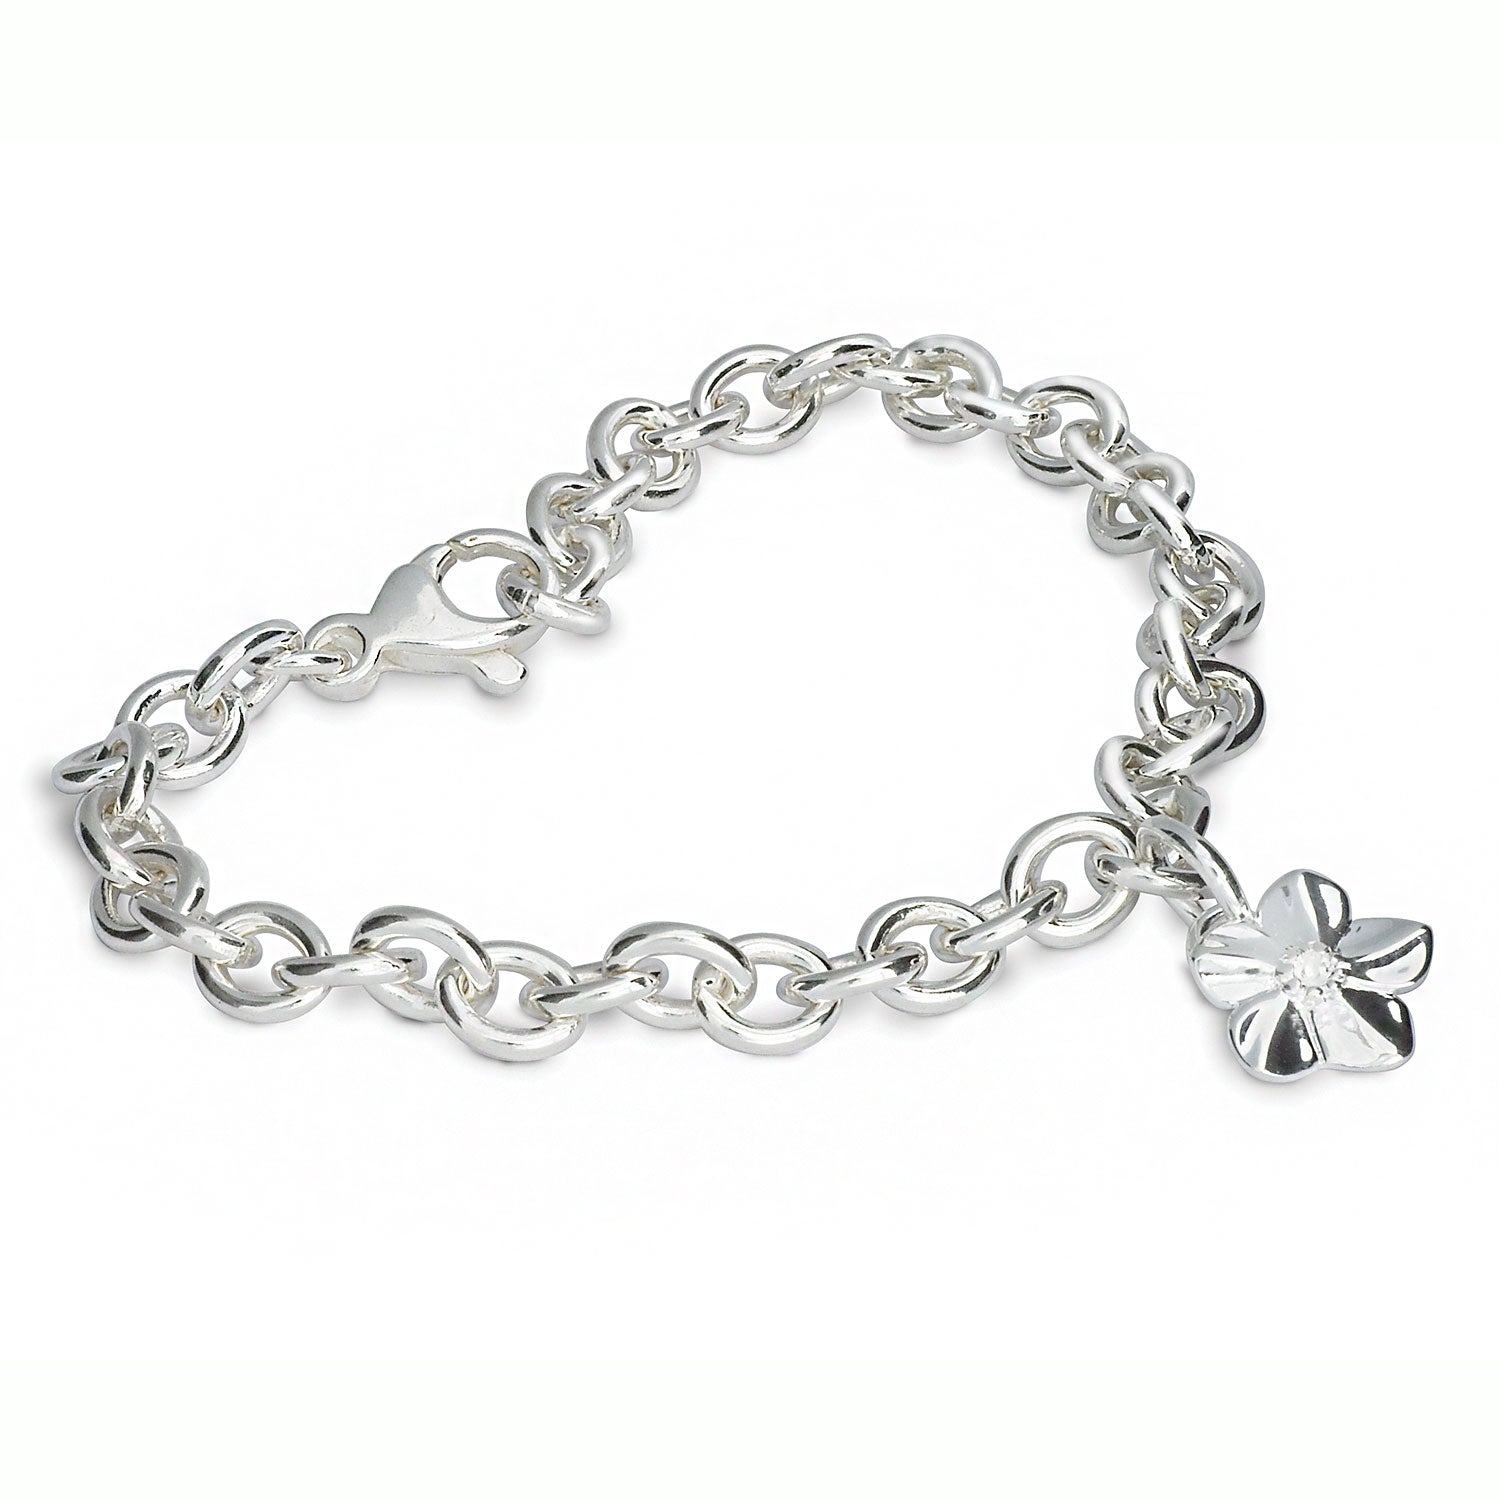 Forget Me Not Flower Silver Chain Charm Bracelet